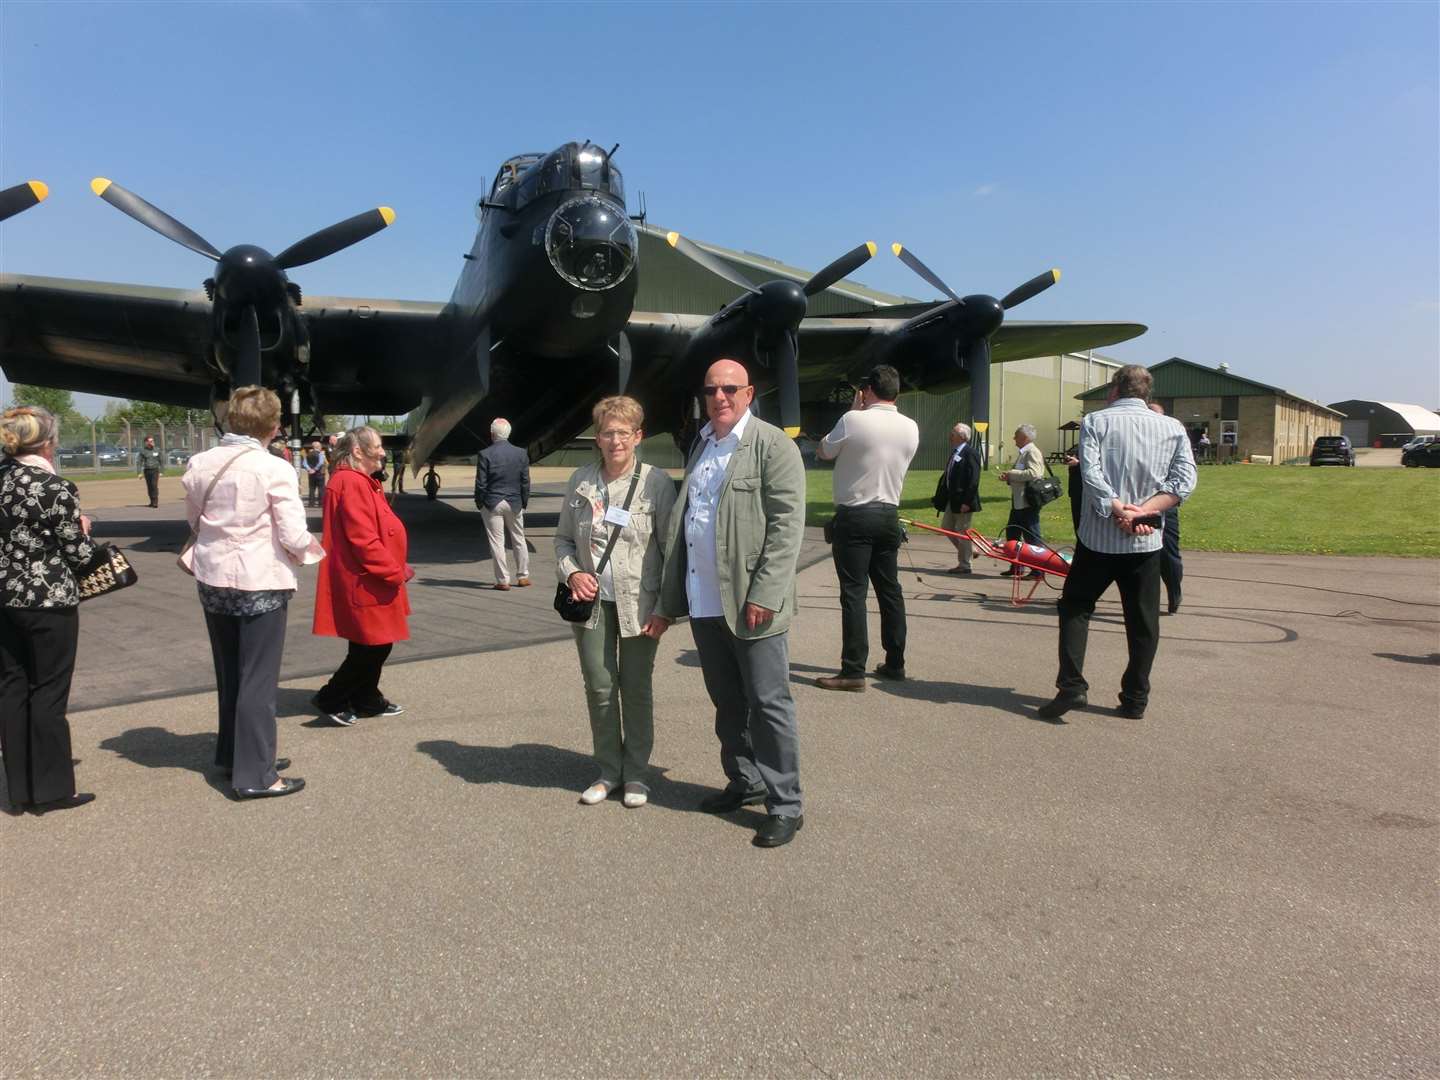 French researcher Bernard Feutry and wife Claudine with a Lancaster bomber